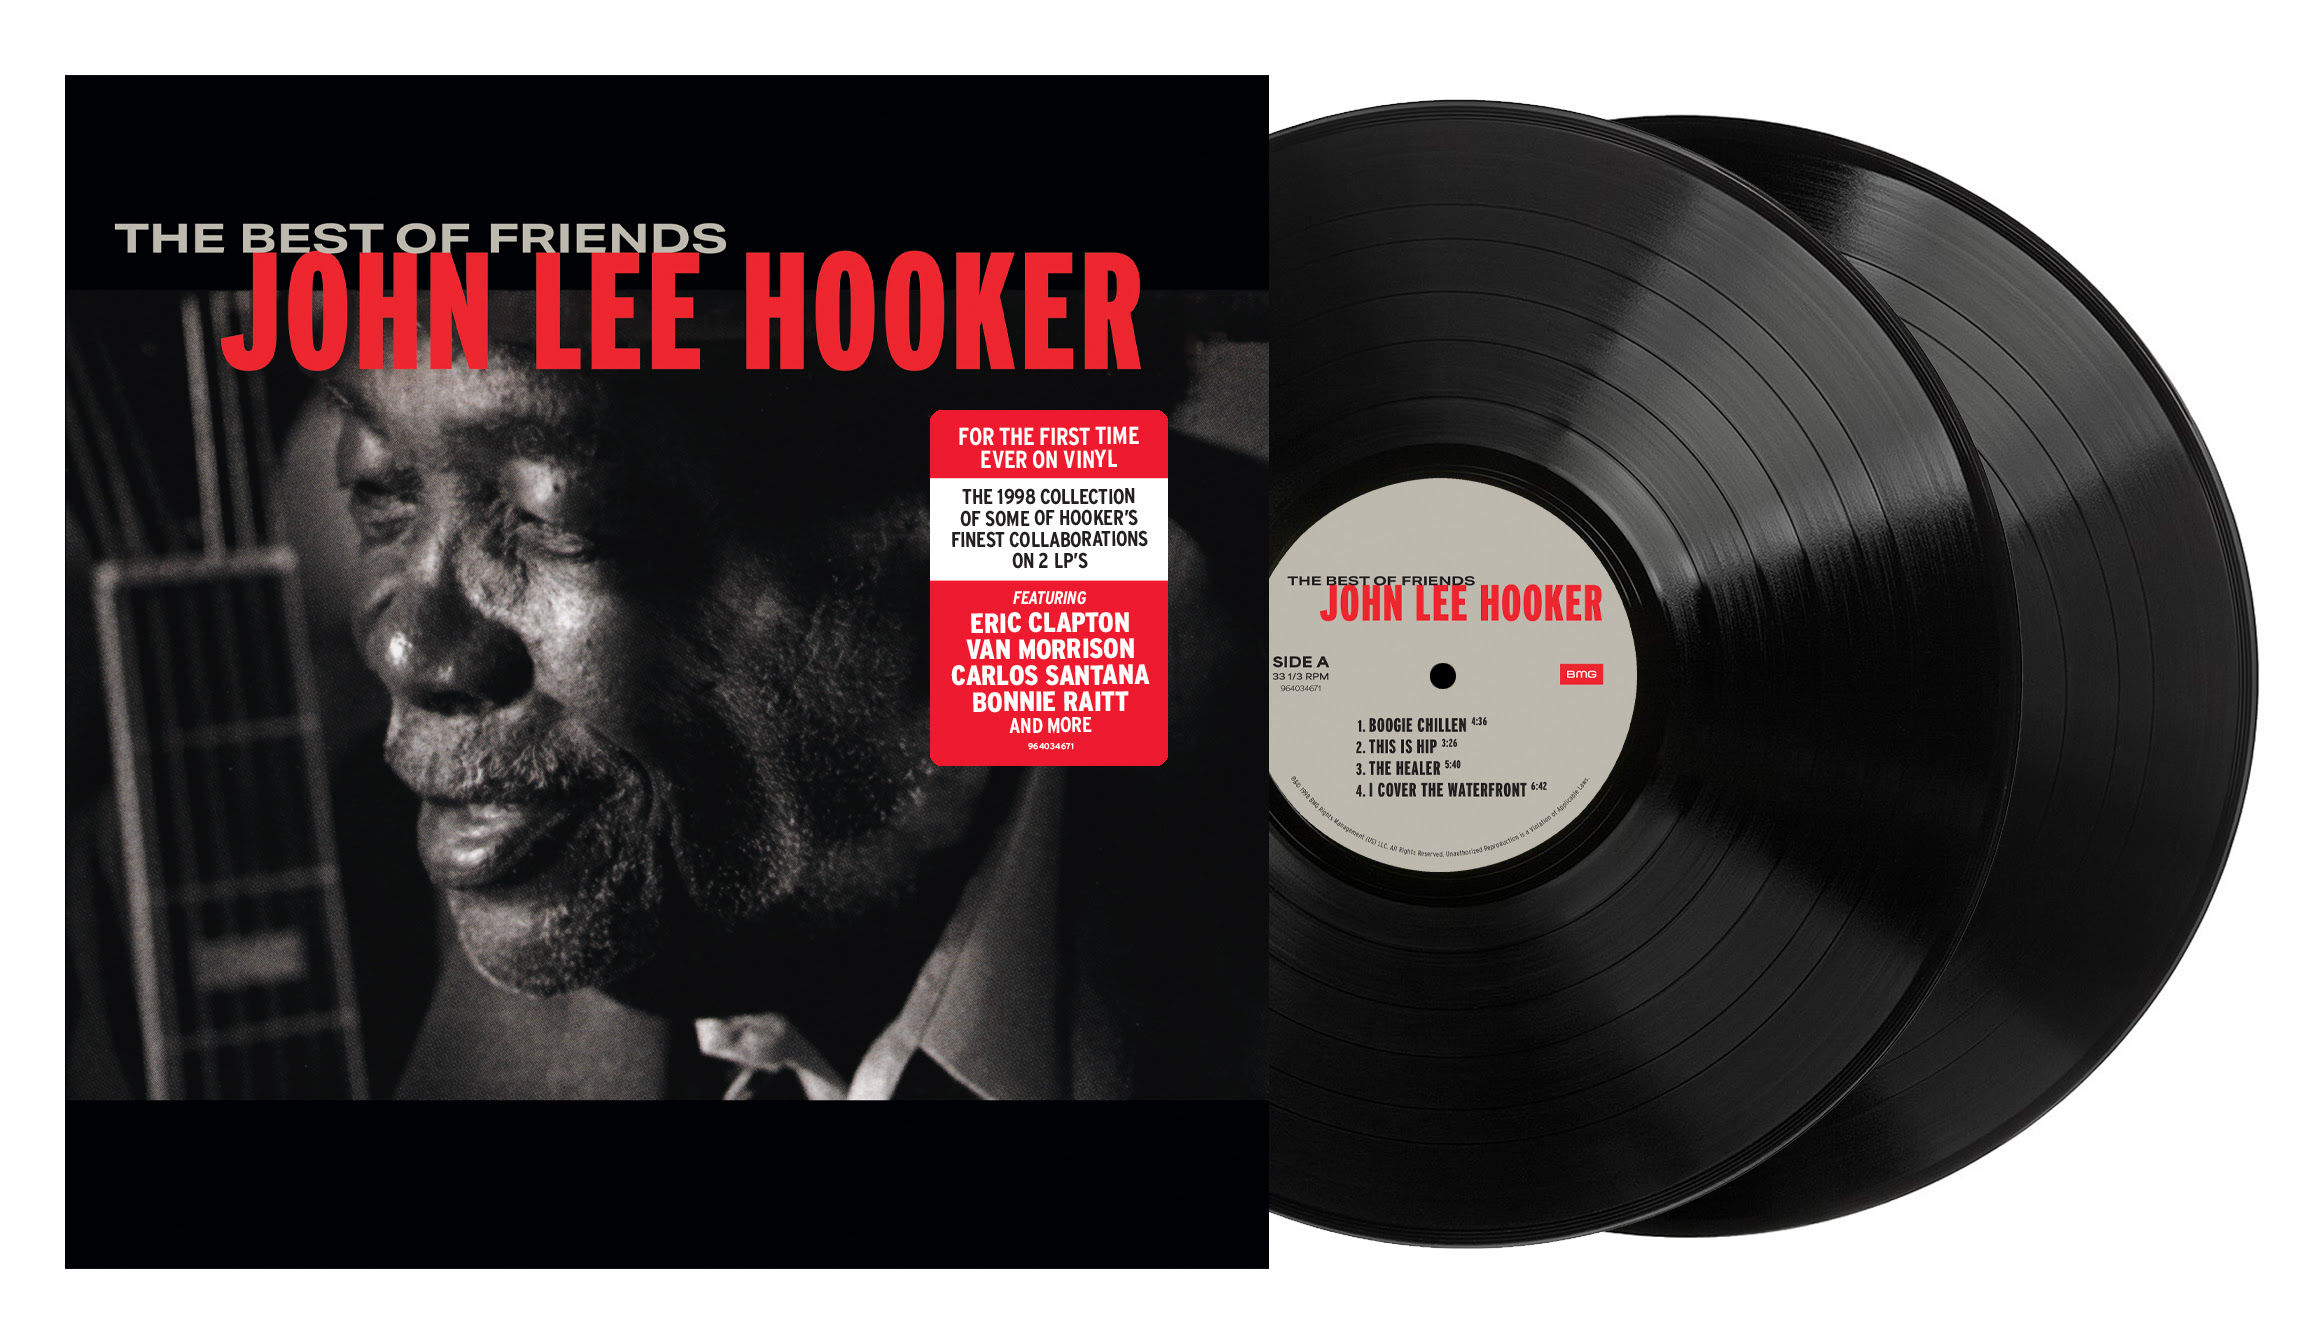 BMG to Reissue JOHN LEE HOOKER'S 'The Best Of Friends' ~ Available on Vinyl for the First Time EVER!